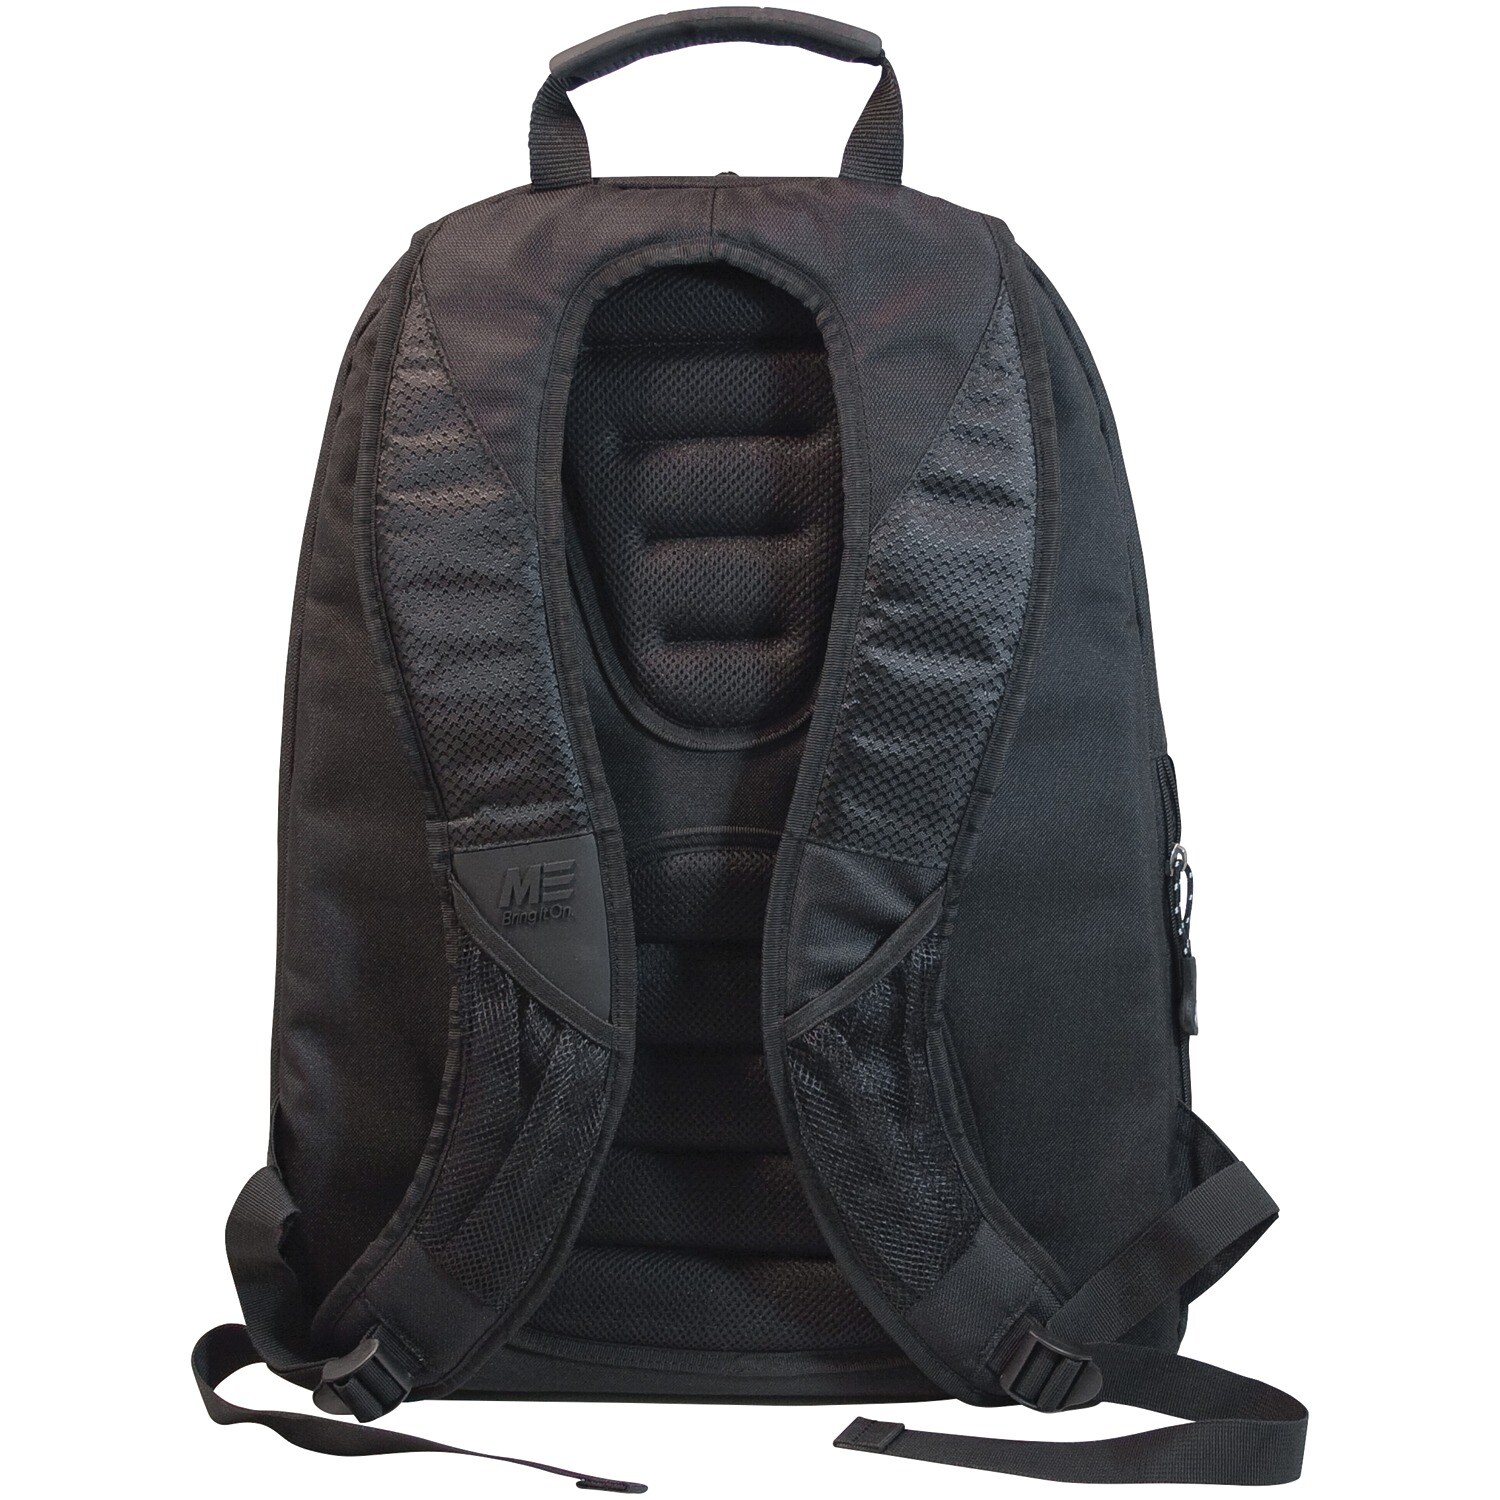 Mobile Edge 19-in H x 13.5-in W x 8-in D Black Backpack in the Bags ...